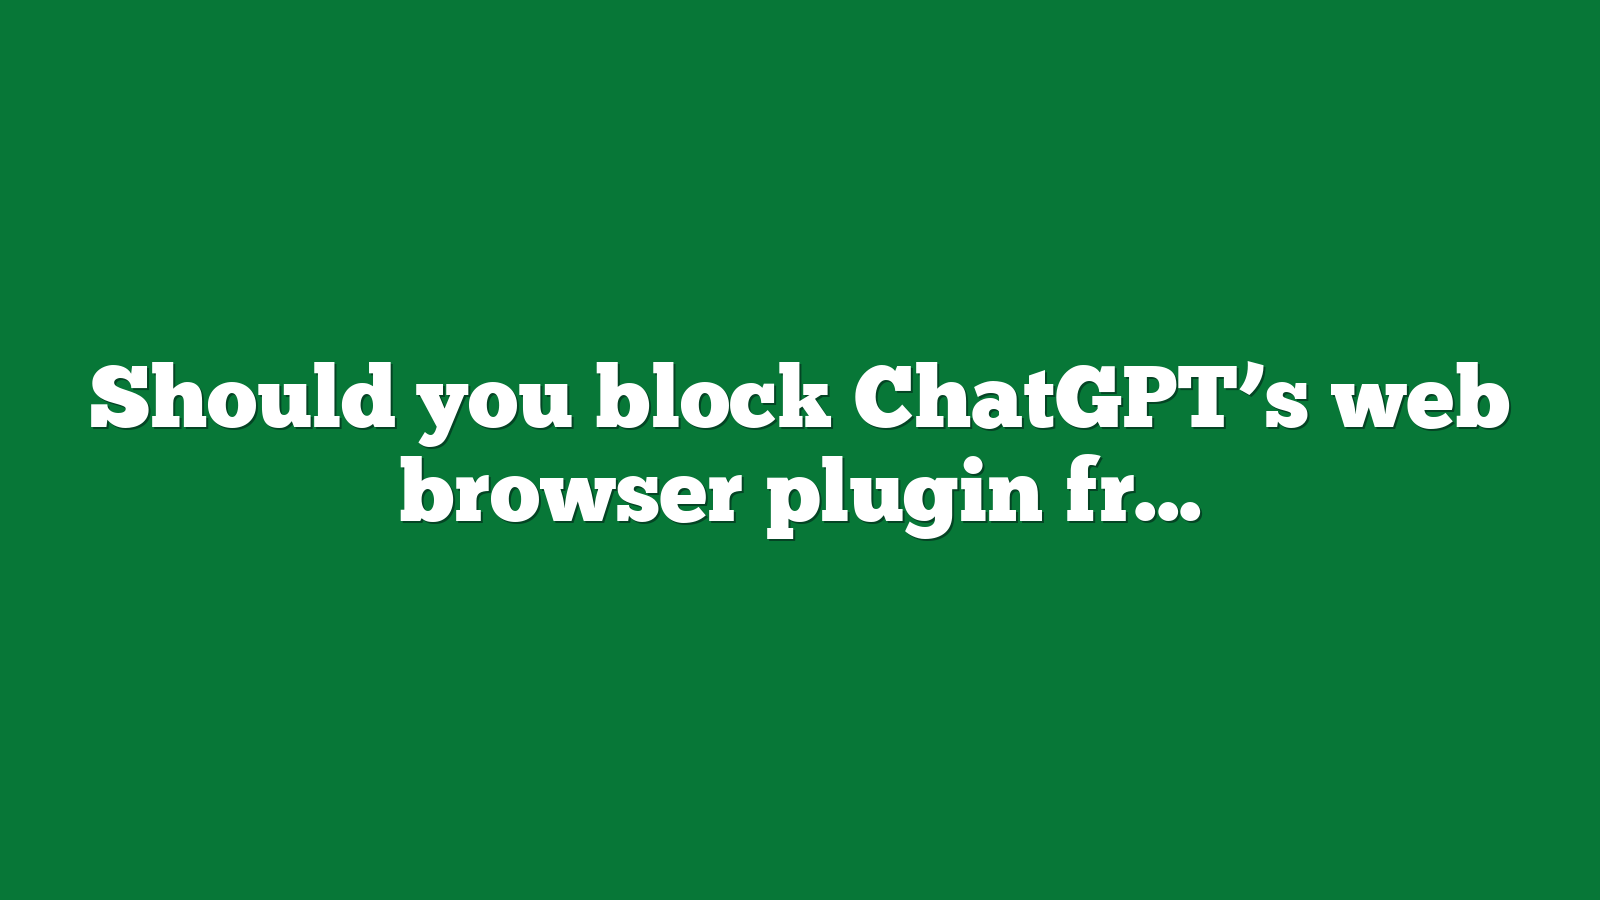 Should you block ChatGPTs web browser plugin from accessing your website